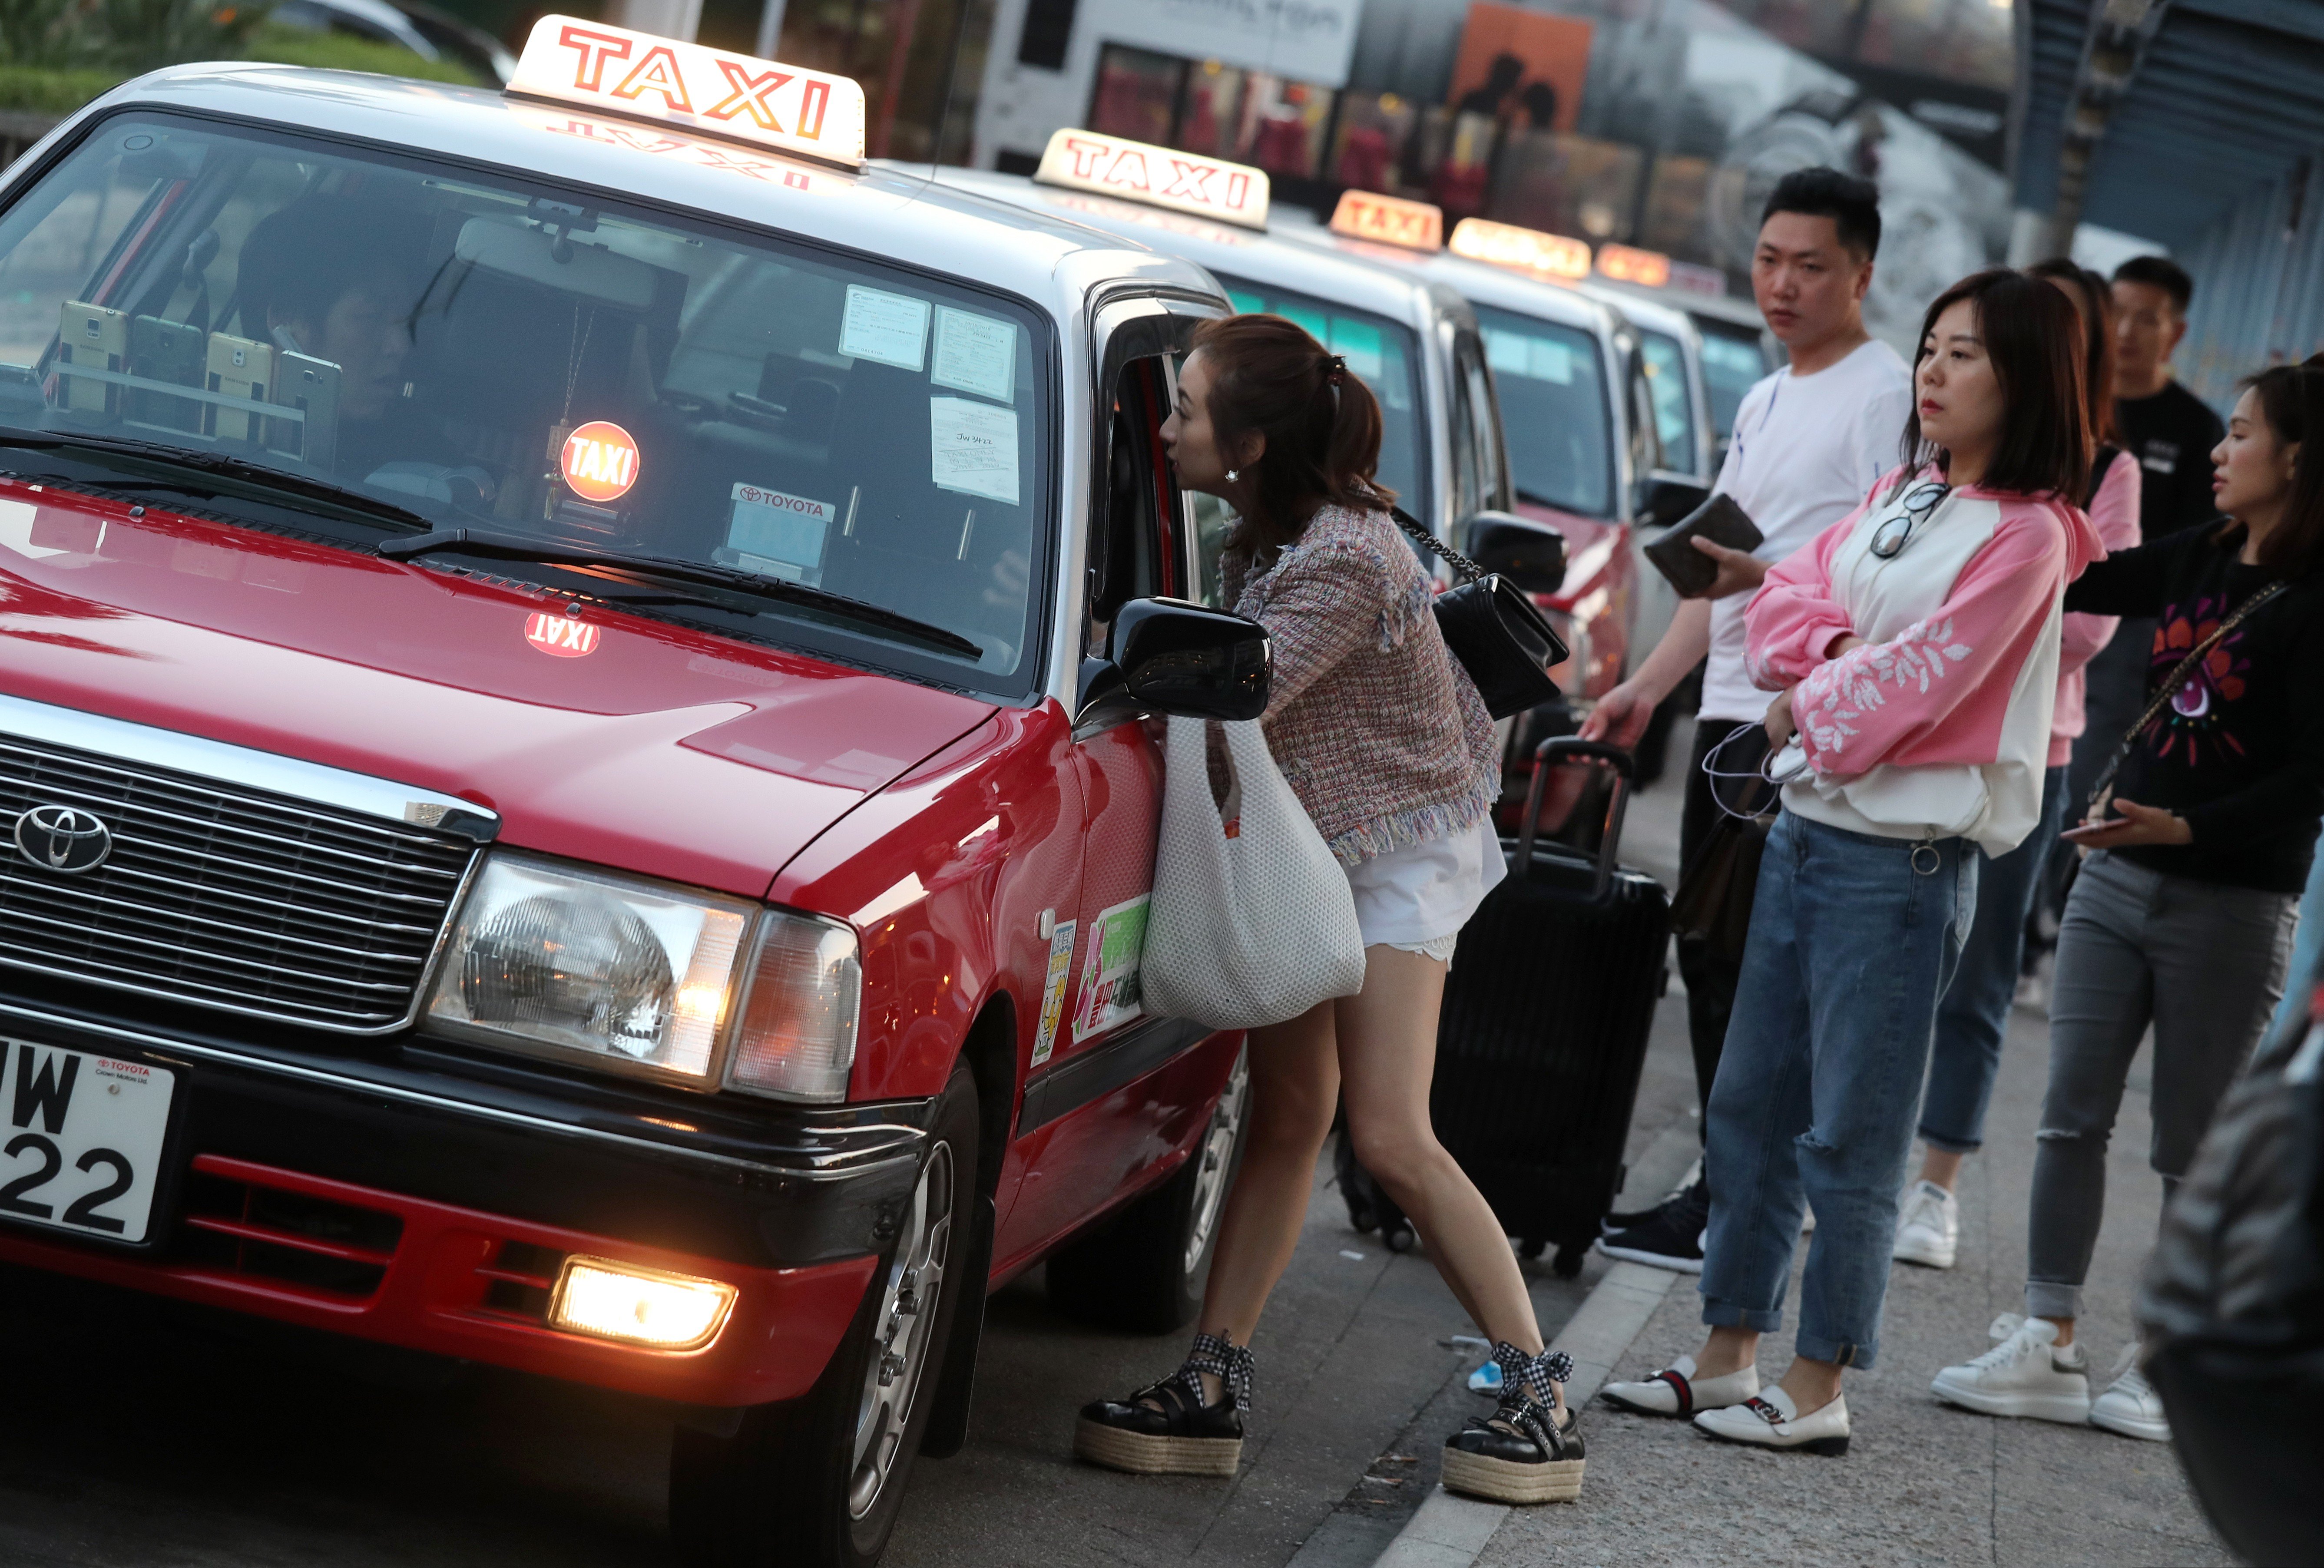 Advocates of Uber say it’s a useful alternative to poor service and behaviour shown by many taxi drivers. Photo: K. Y. Cheng